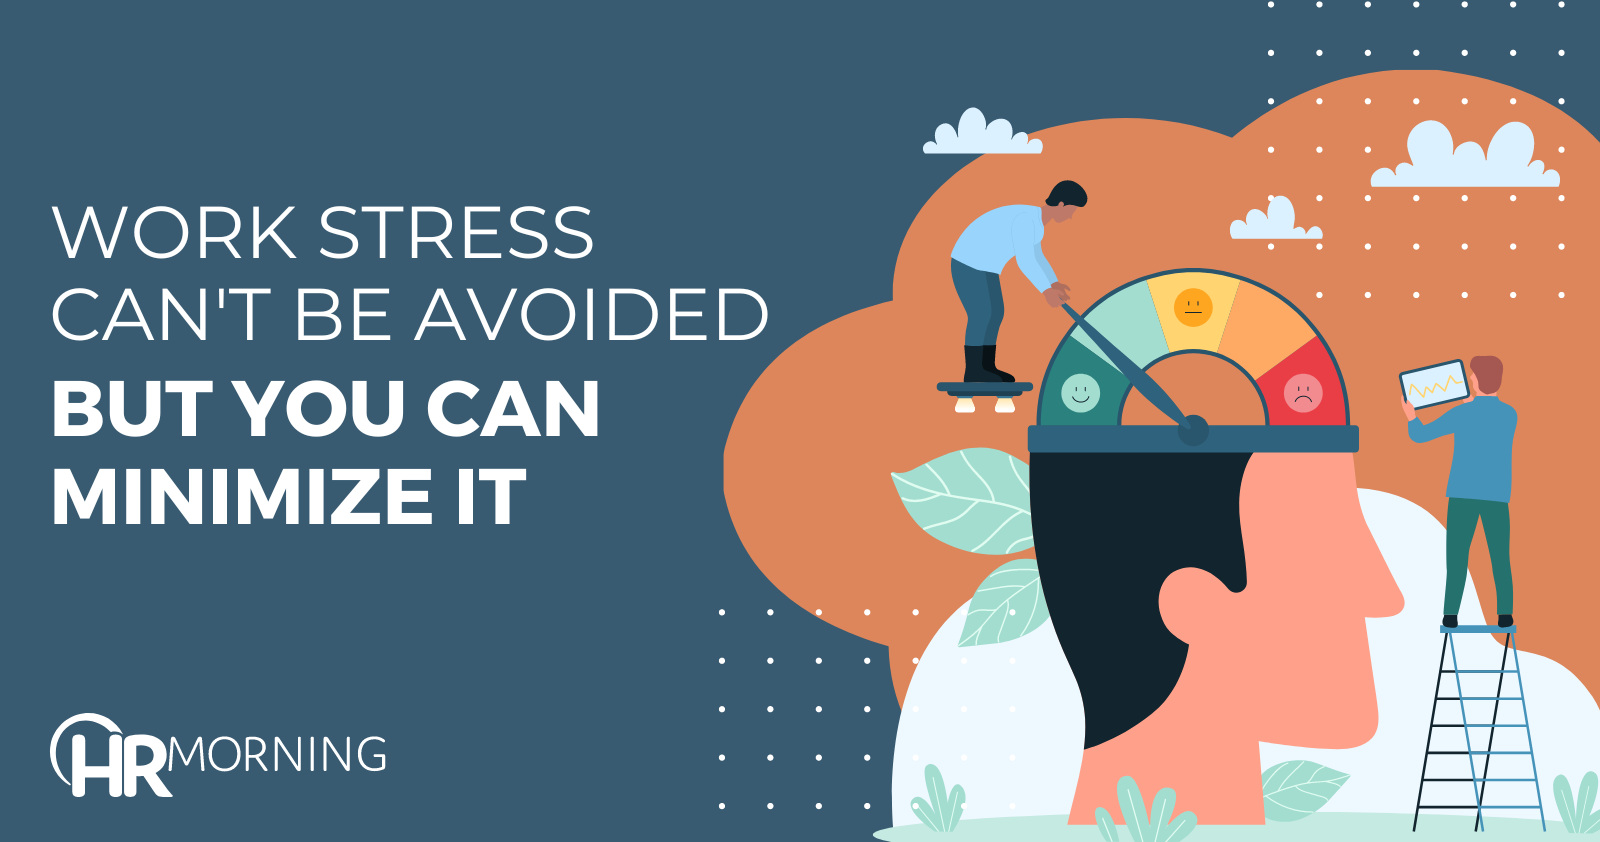 Work stress can't be avoided, but you can minimize it